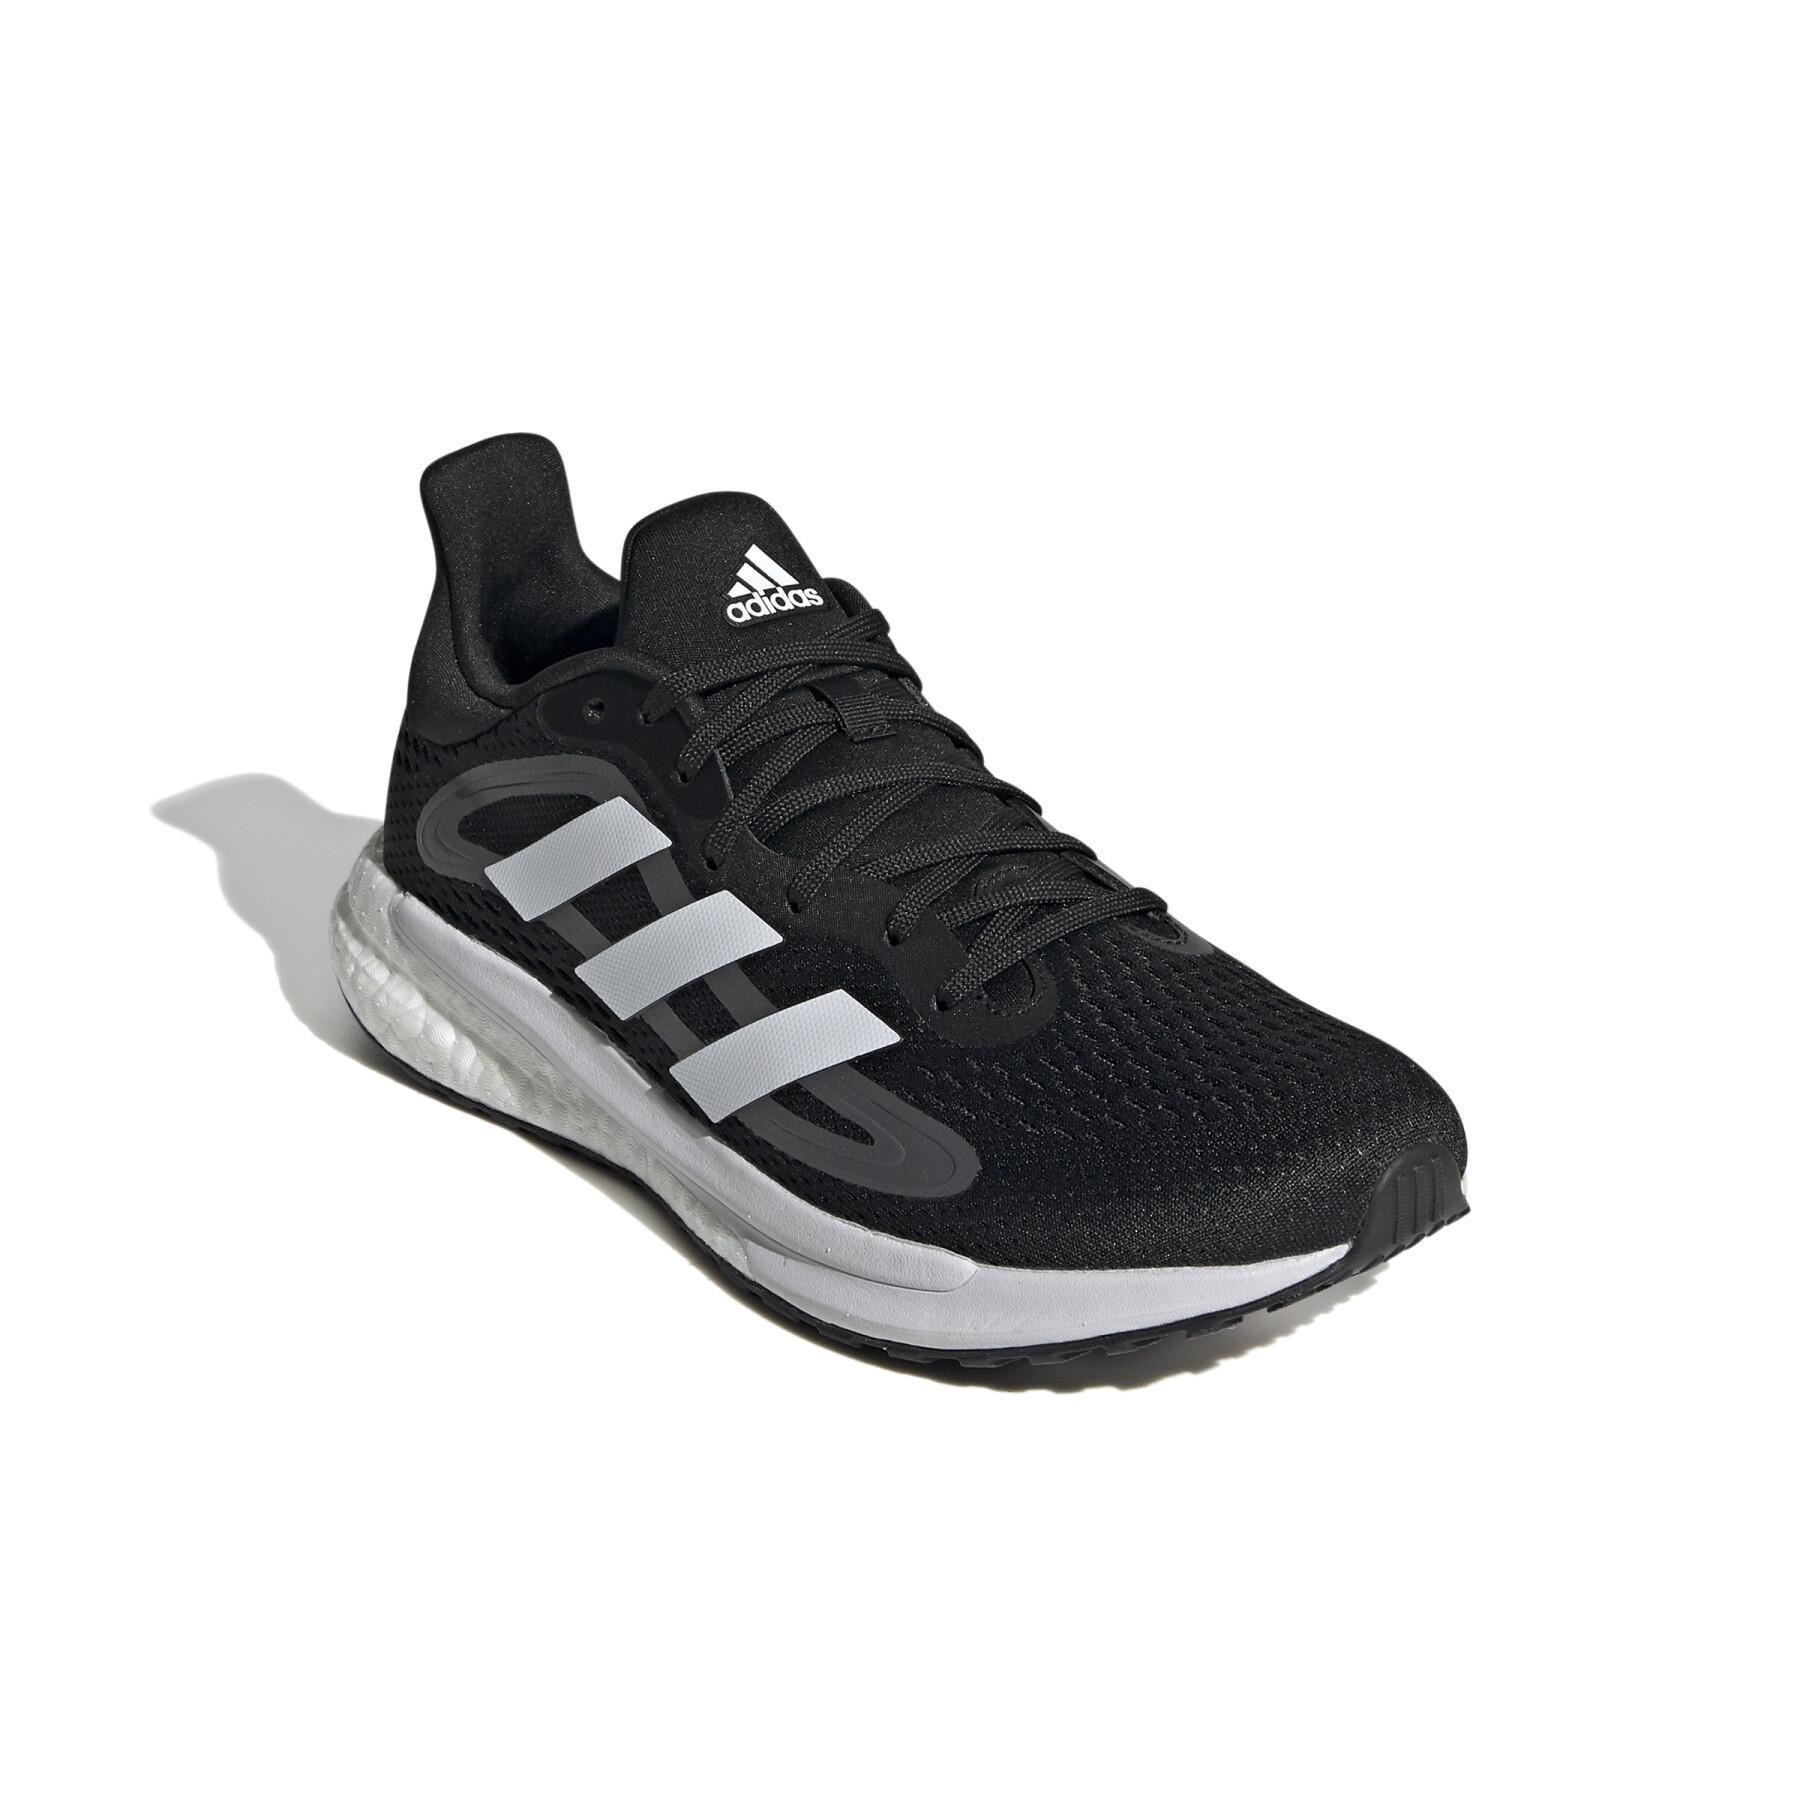 Women's running shoes adidas SolarGlide 4 ST